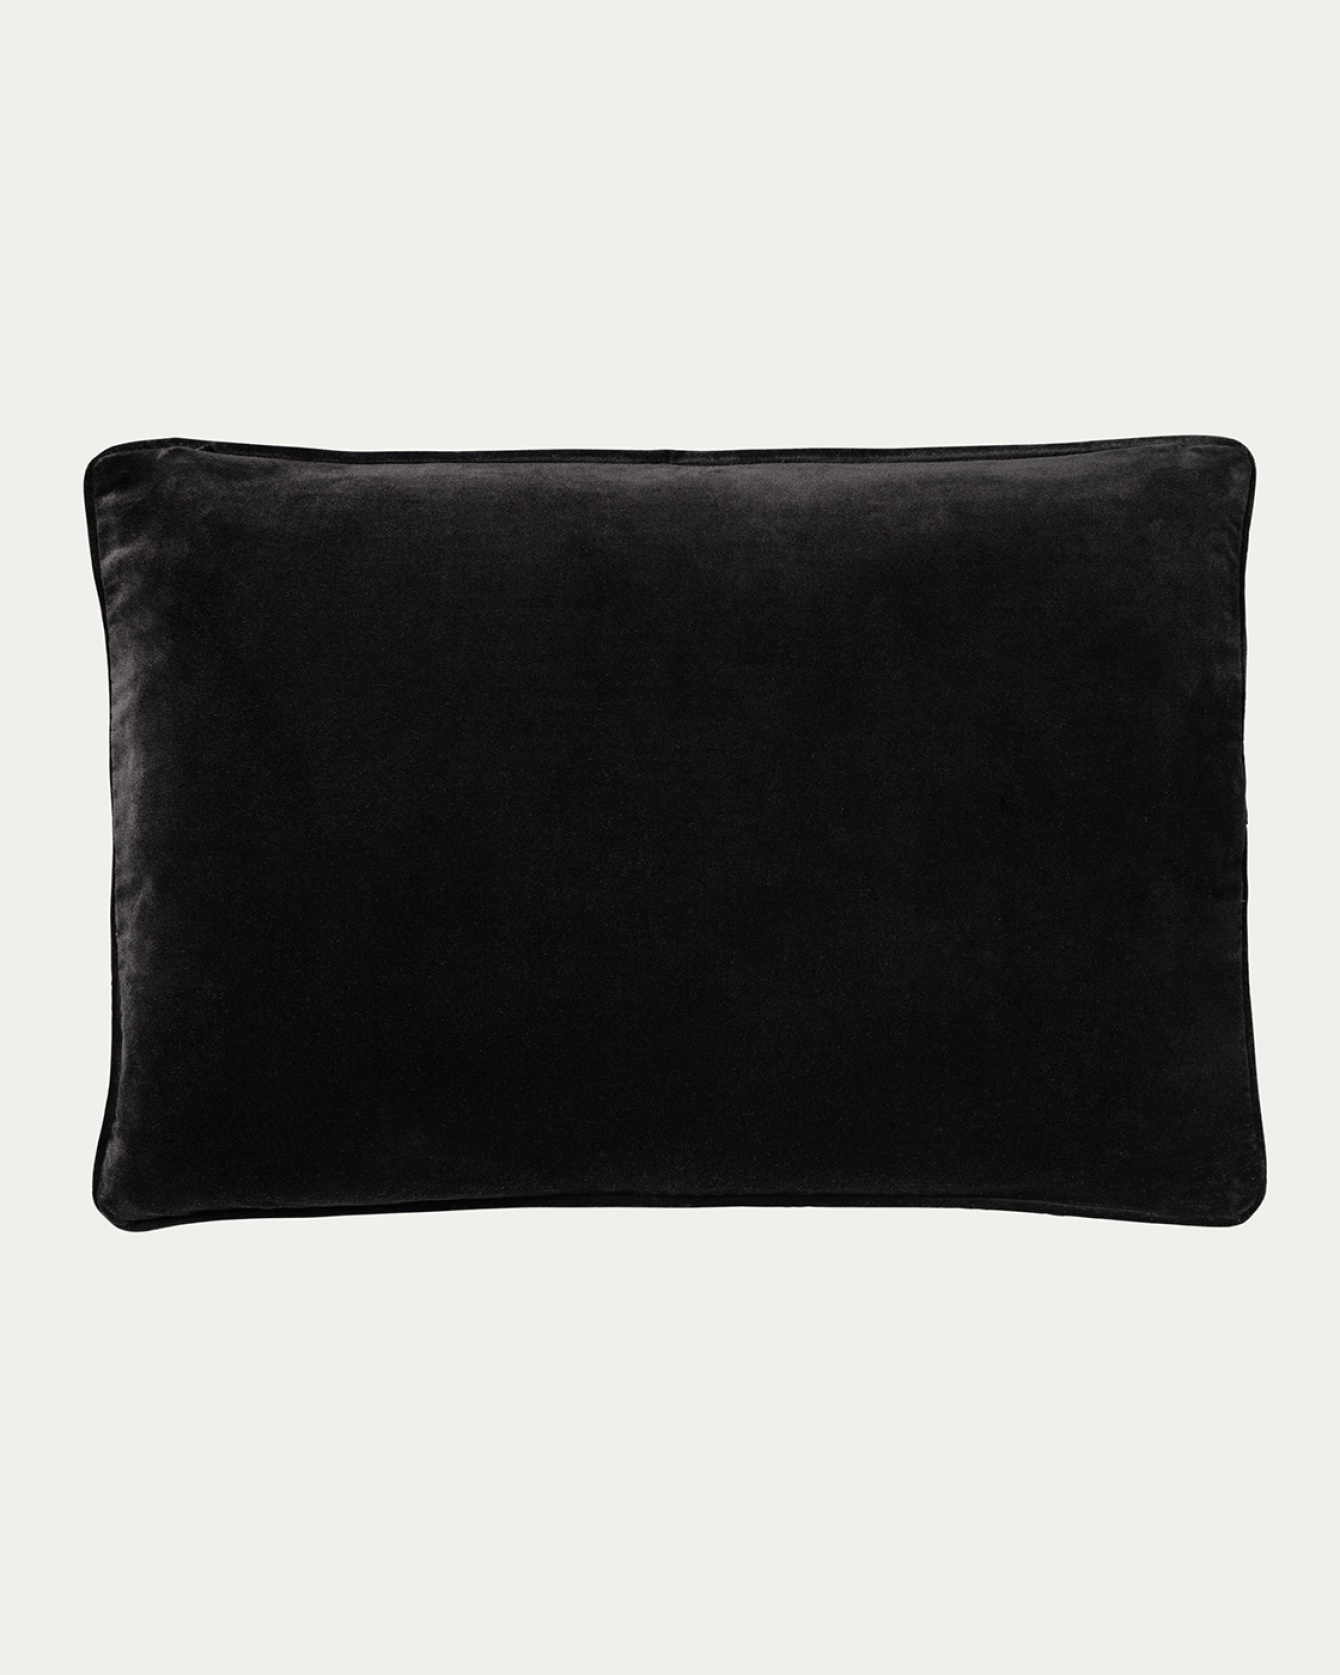 Product image black PAOLO cushion cover in soft organic cotton velvet from LINUM DESIGN. Size 40x60 cm.